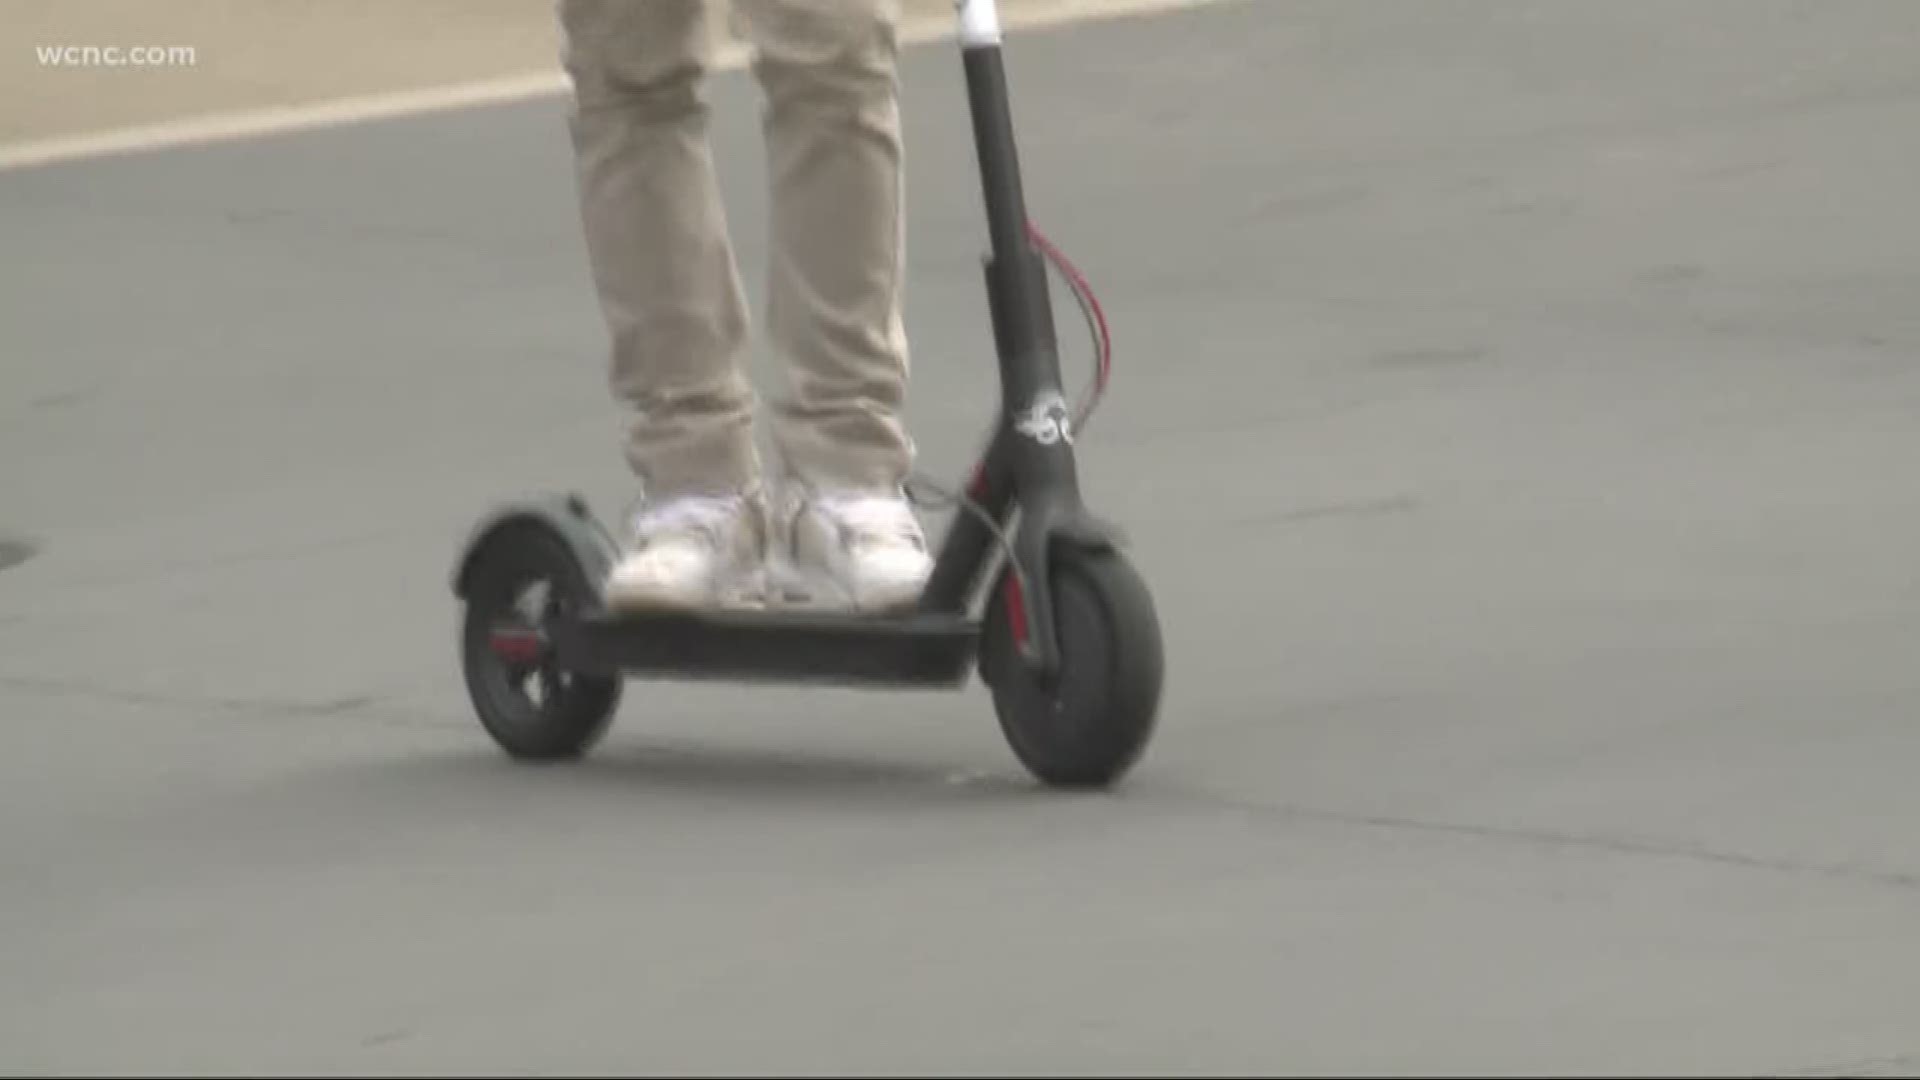 The rules that come along with those scooters, like wearing helmets and not riding on sidewalks, are usually broken -- which is contributing to the high number of injuries.